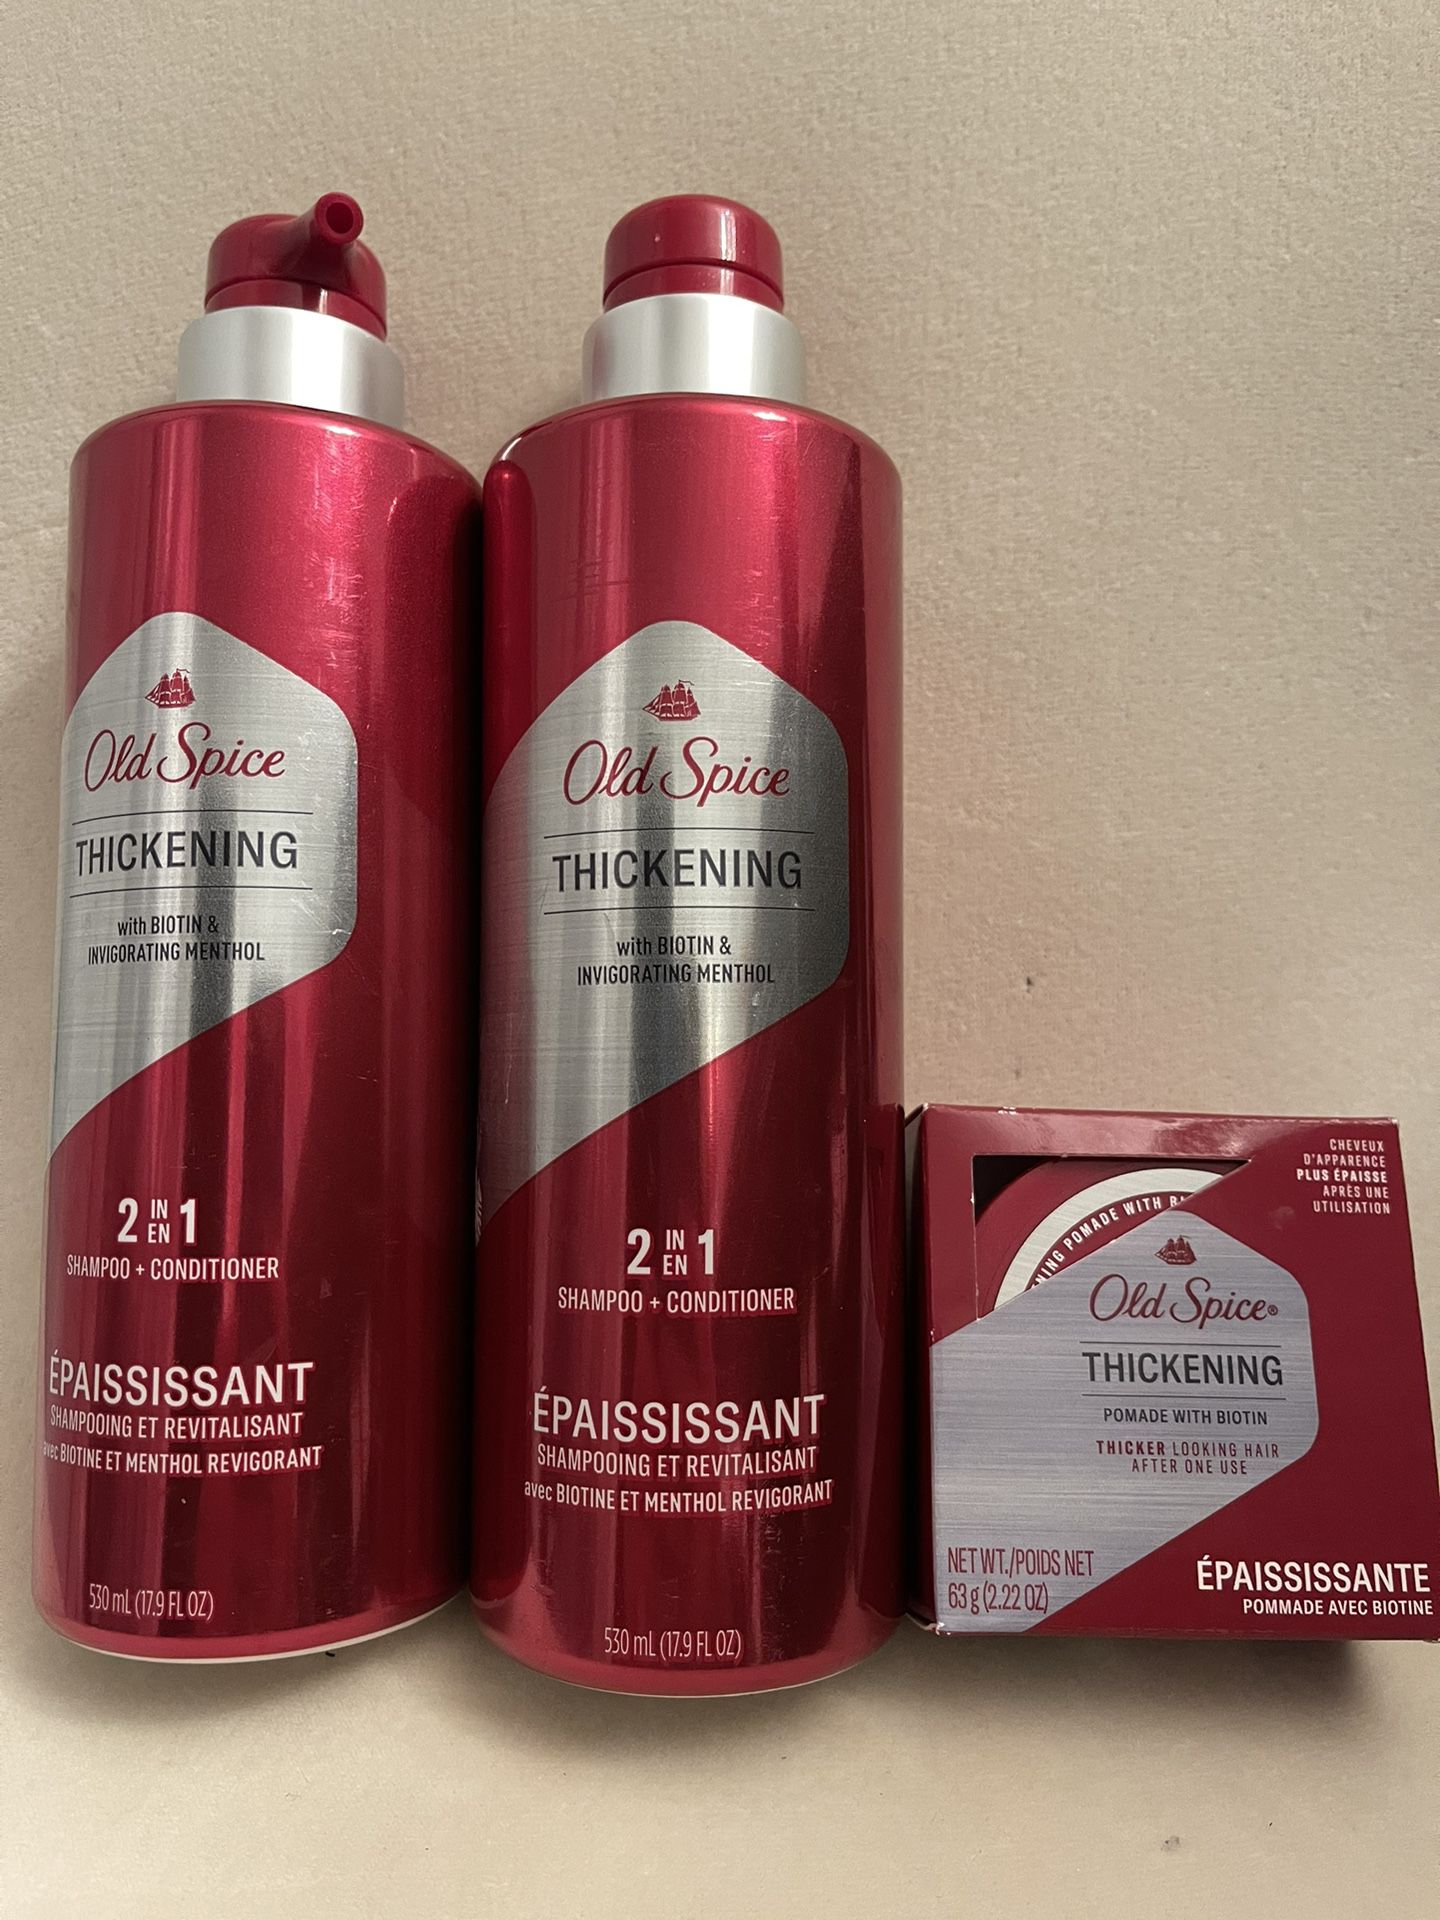 Old Spice Thickening Bundle